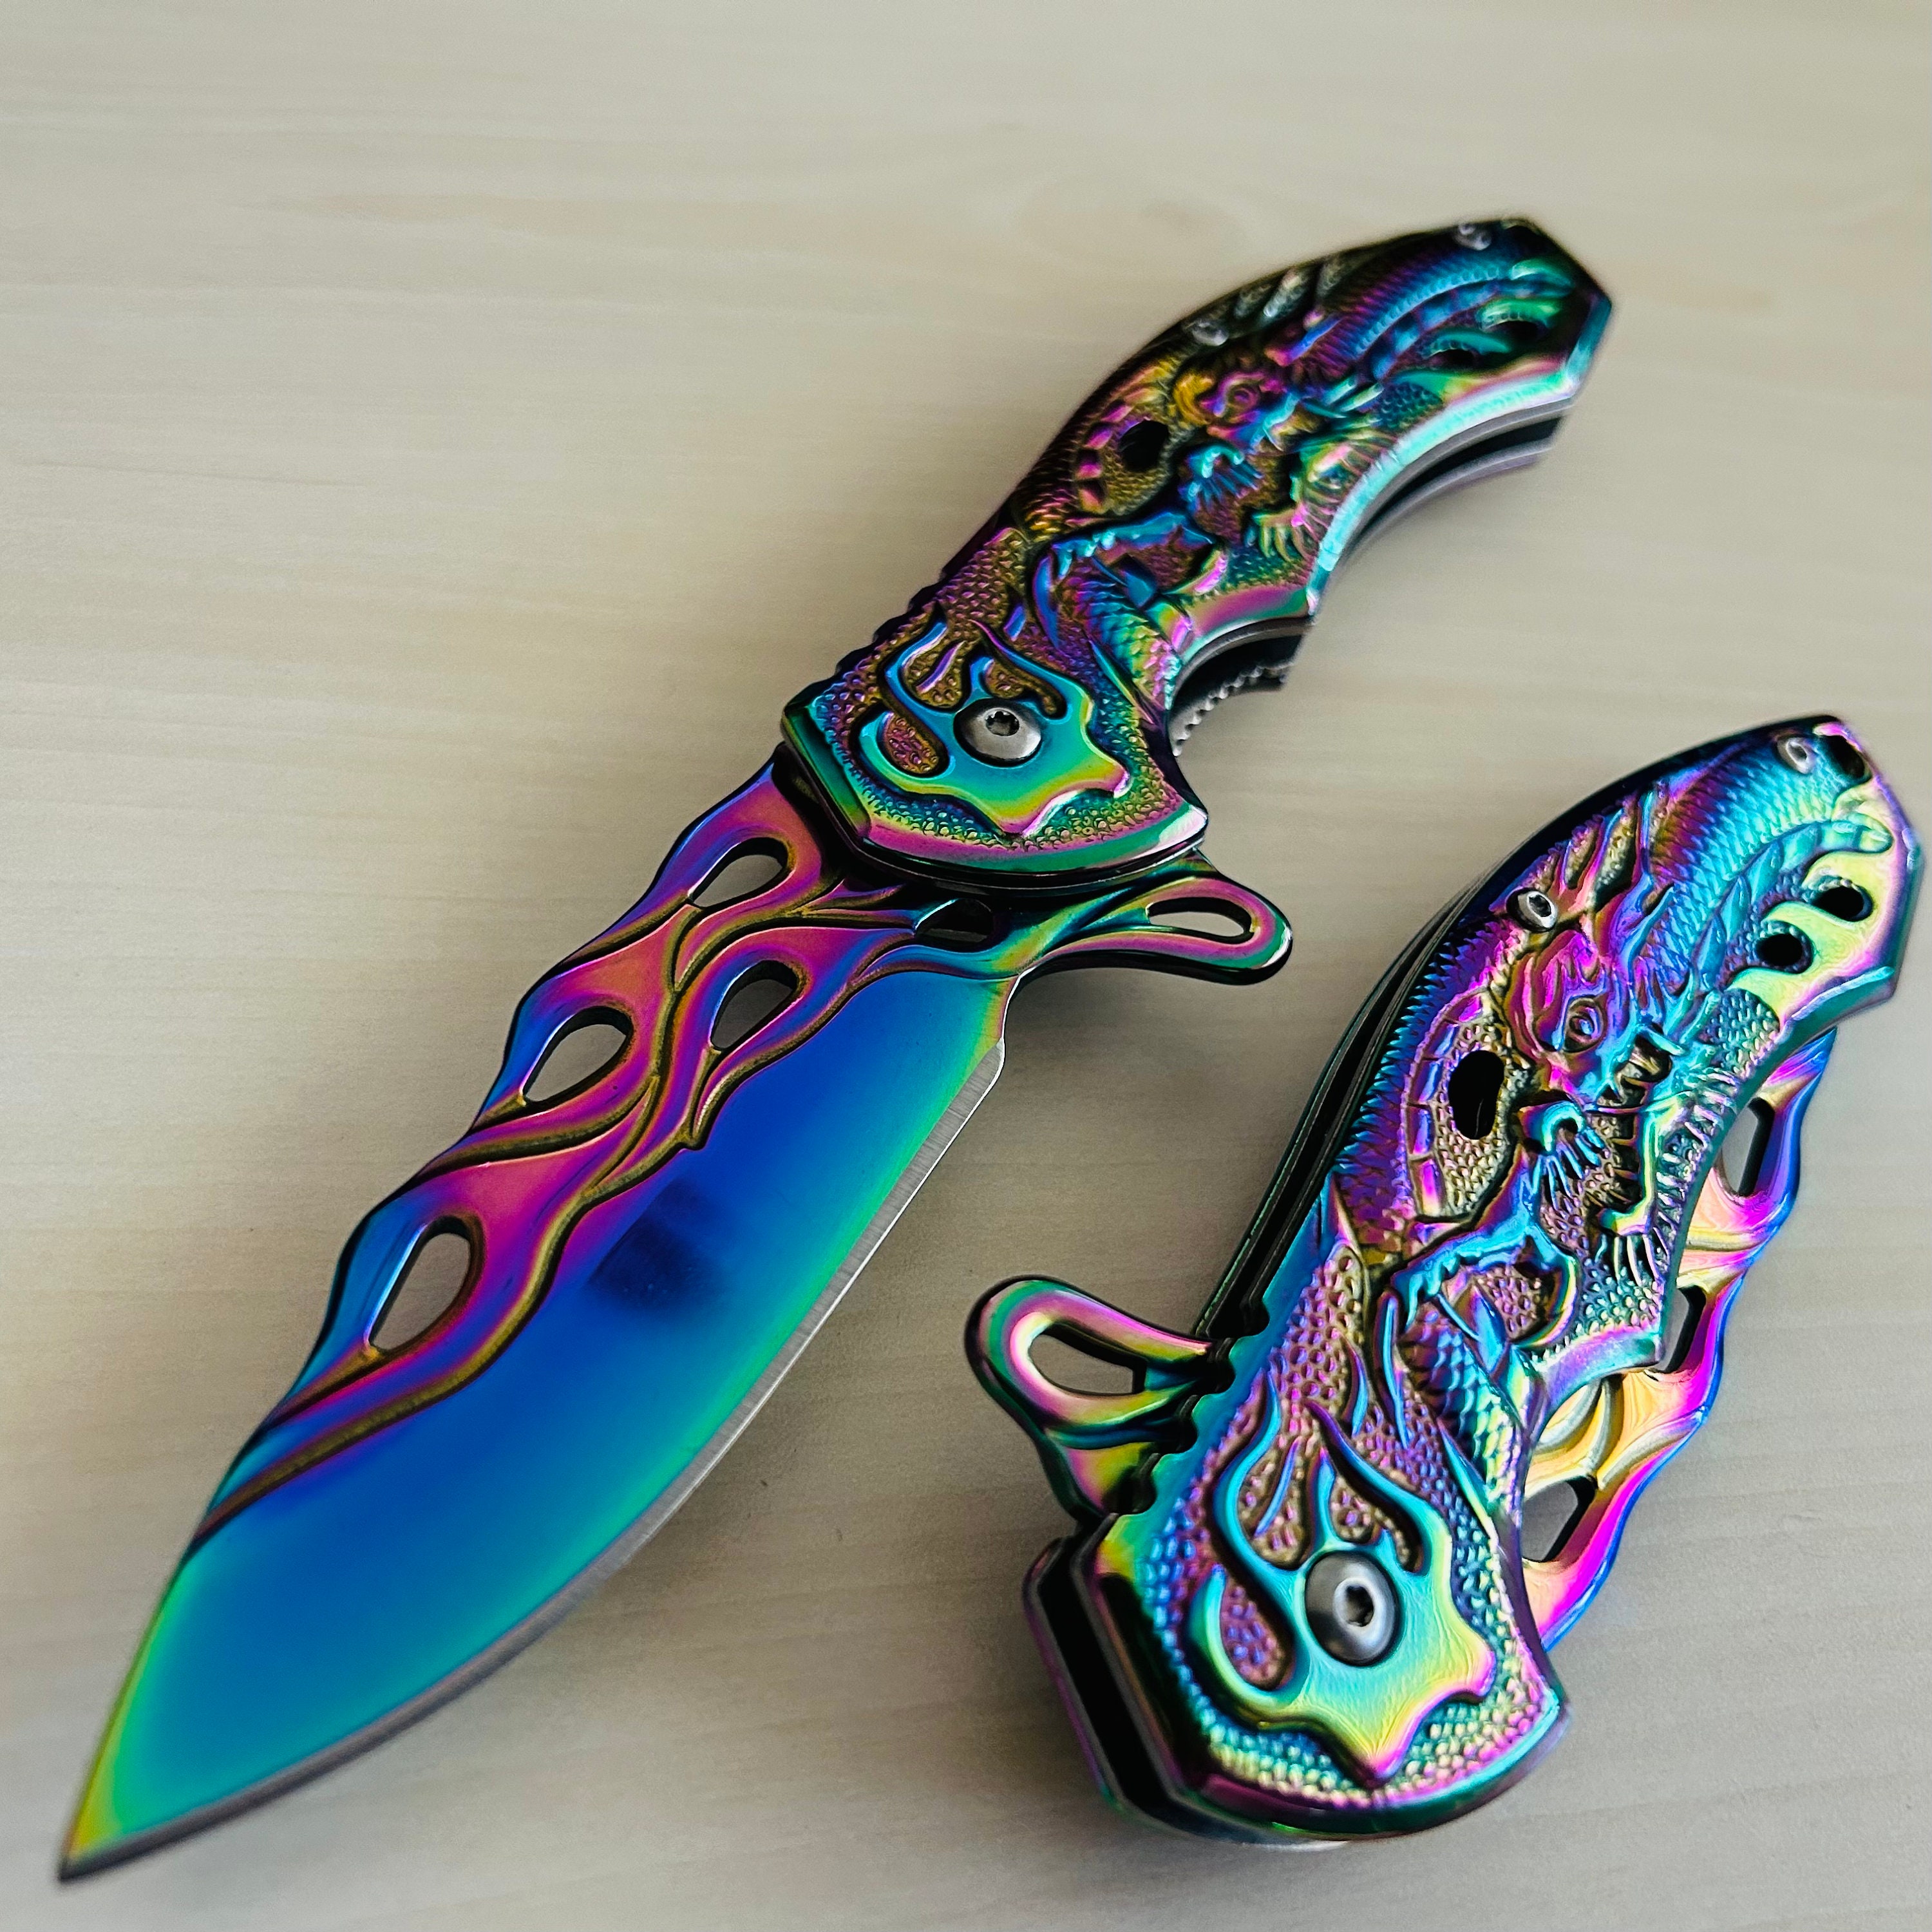 Guys Ladies Rainbow Multi Color All Metal Spring Assisted Pocket Knife 4.2  oz.